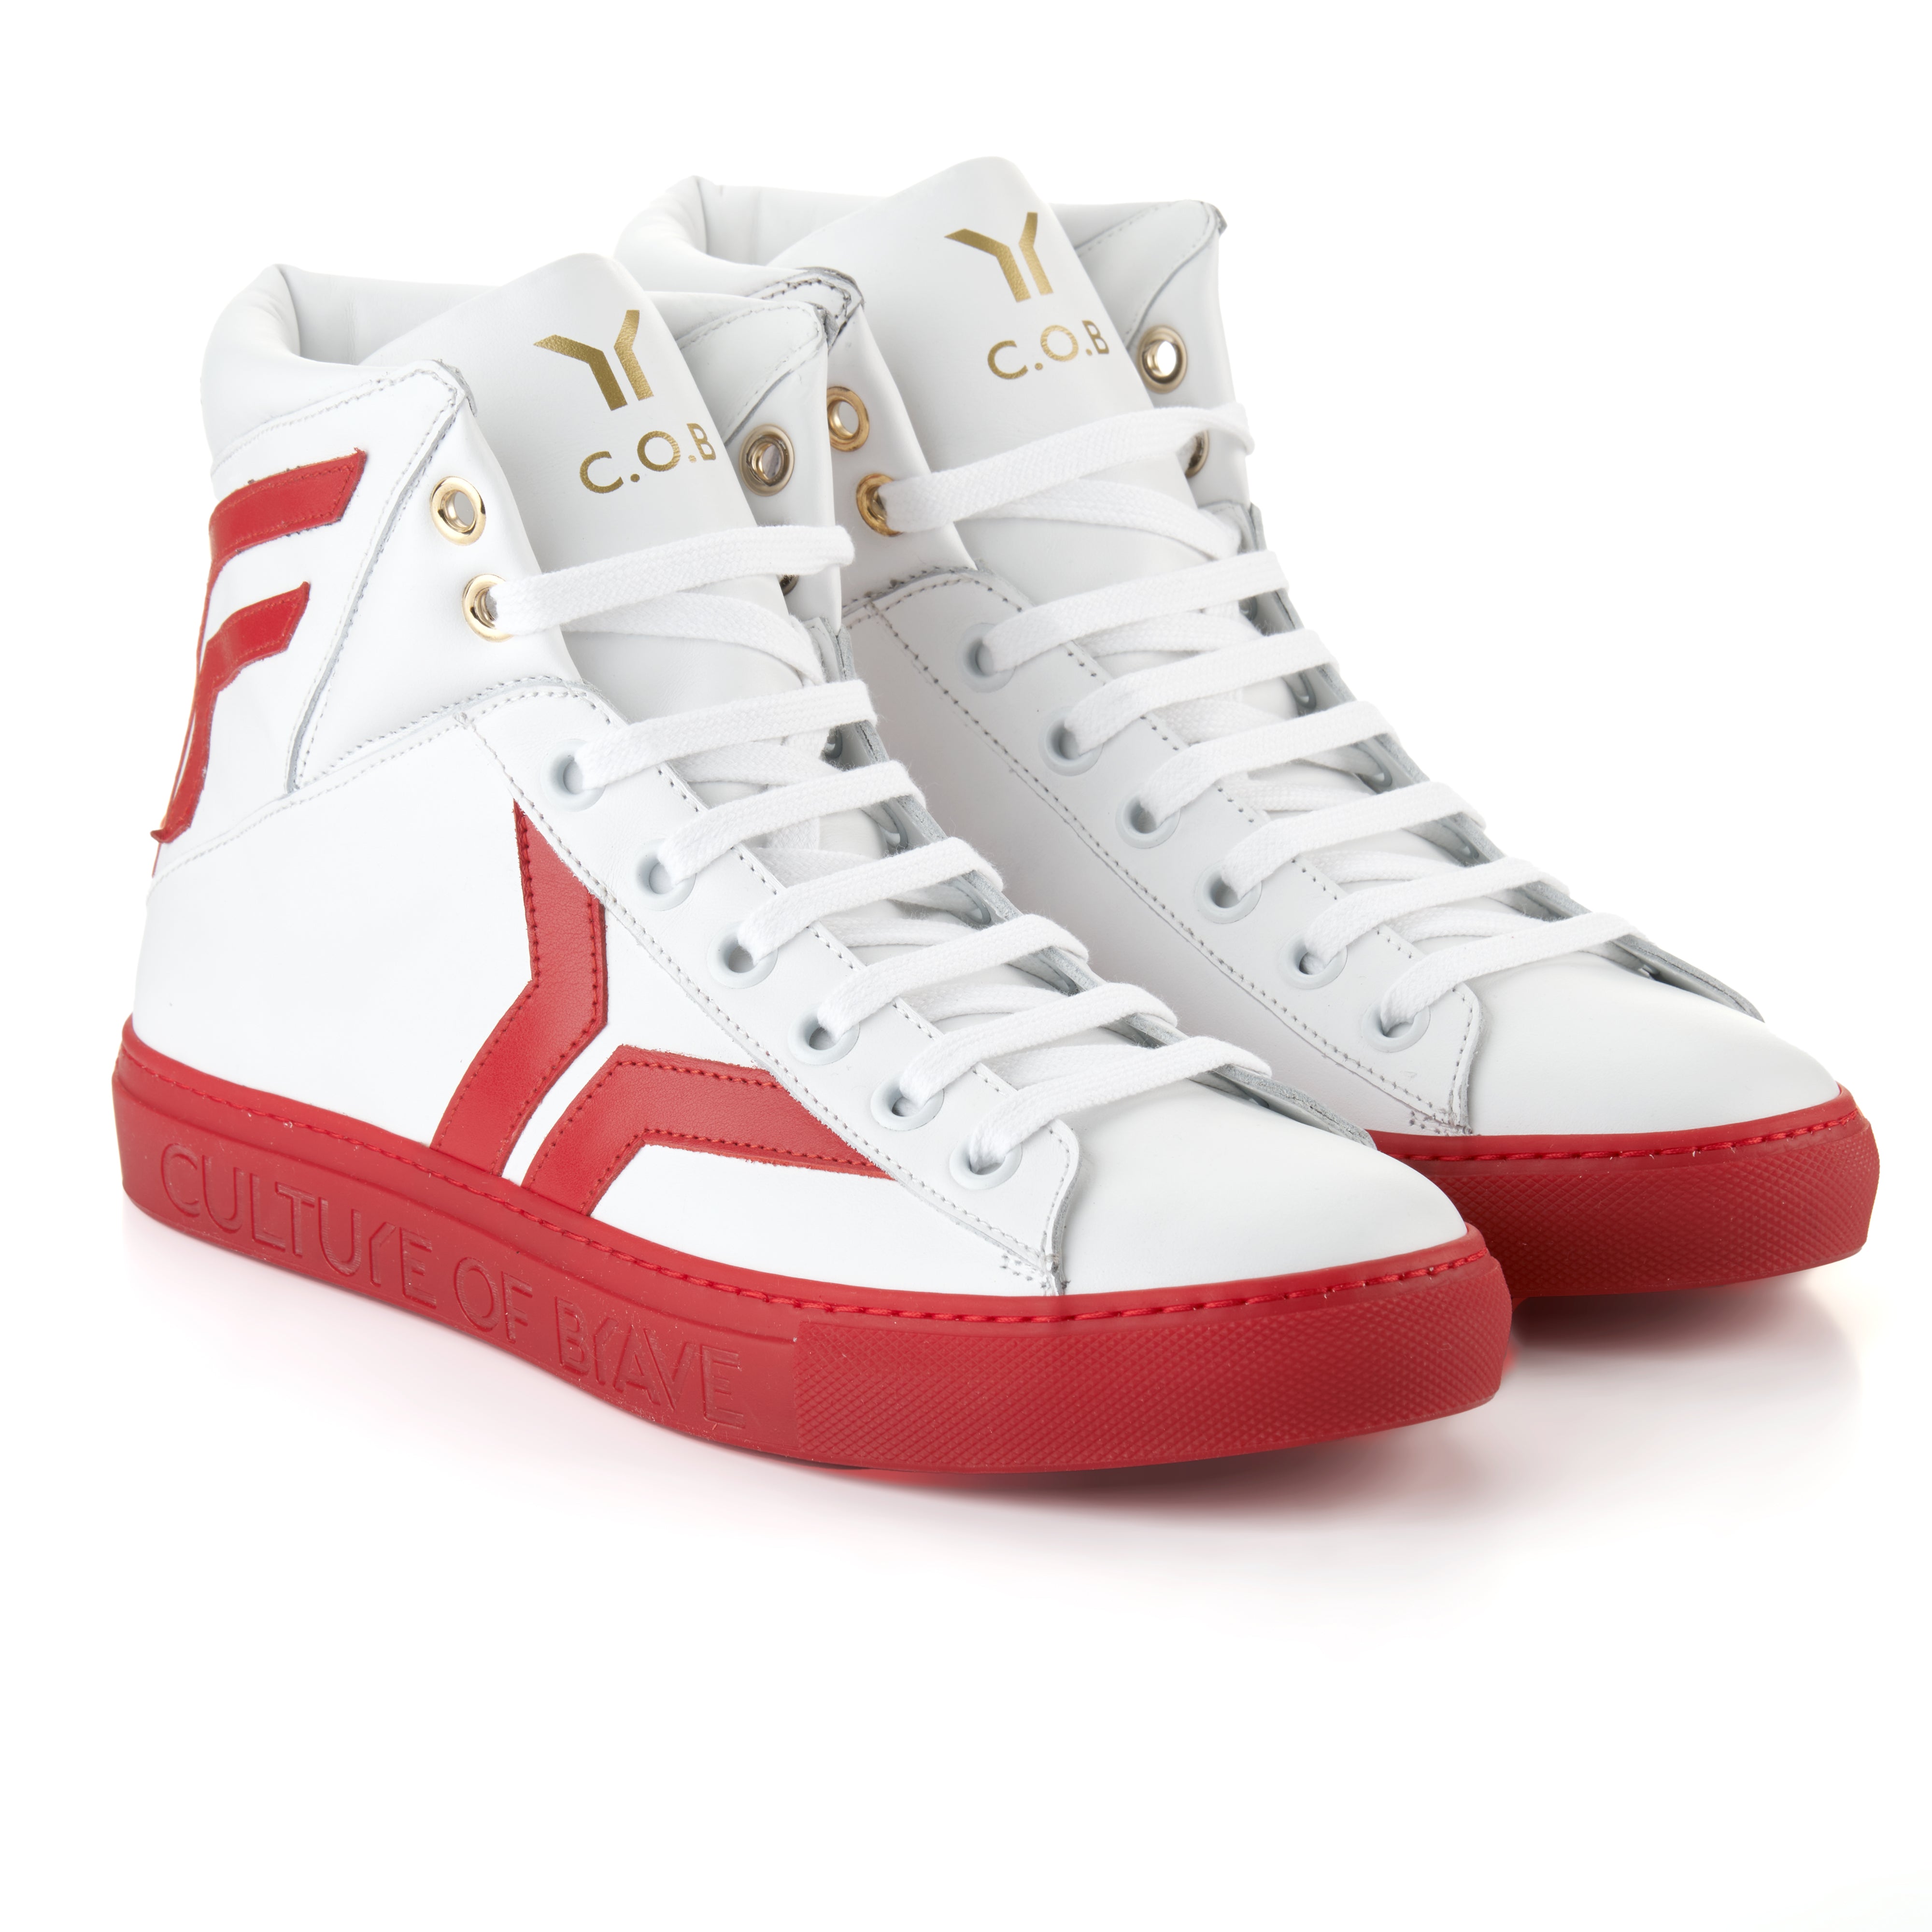 Prepared to Risk 23B Women White leather red wing red sole high cut